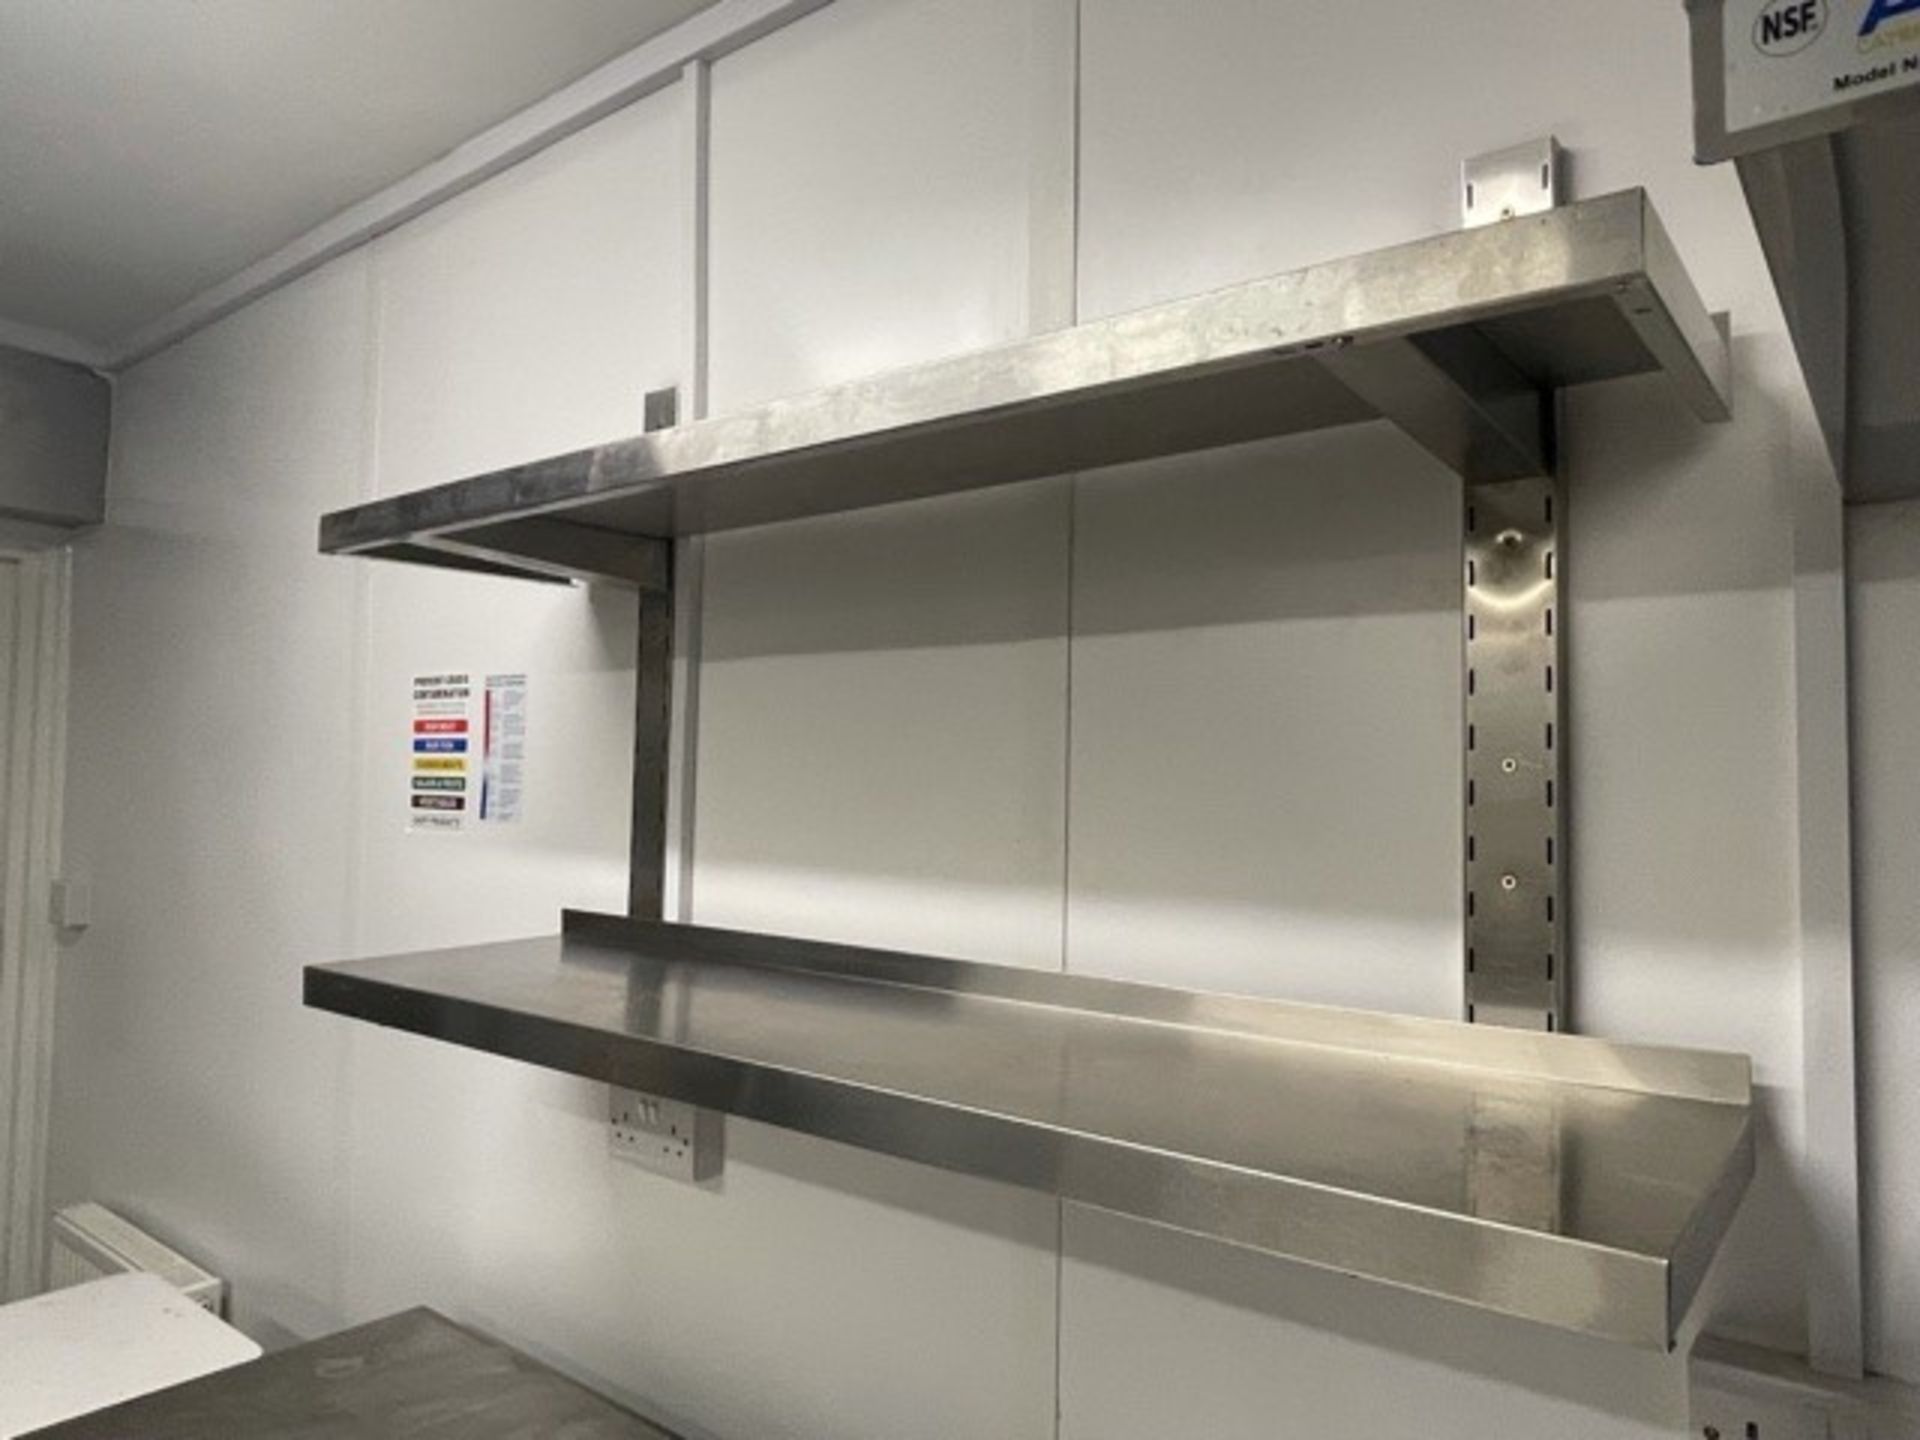 Stainless Steel Wall Shelf 2 Levels - Image 3 of 3